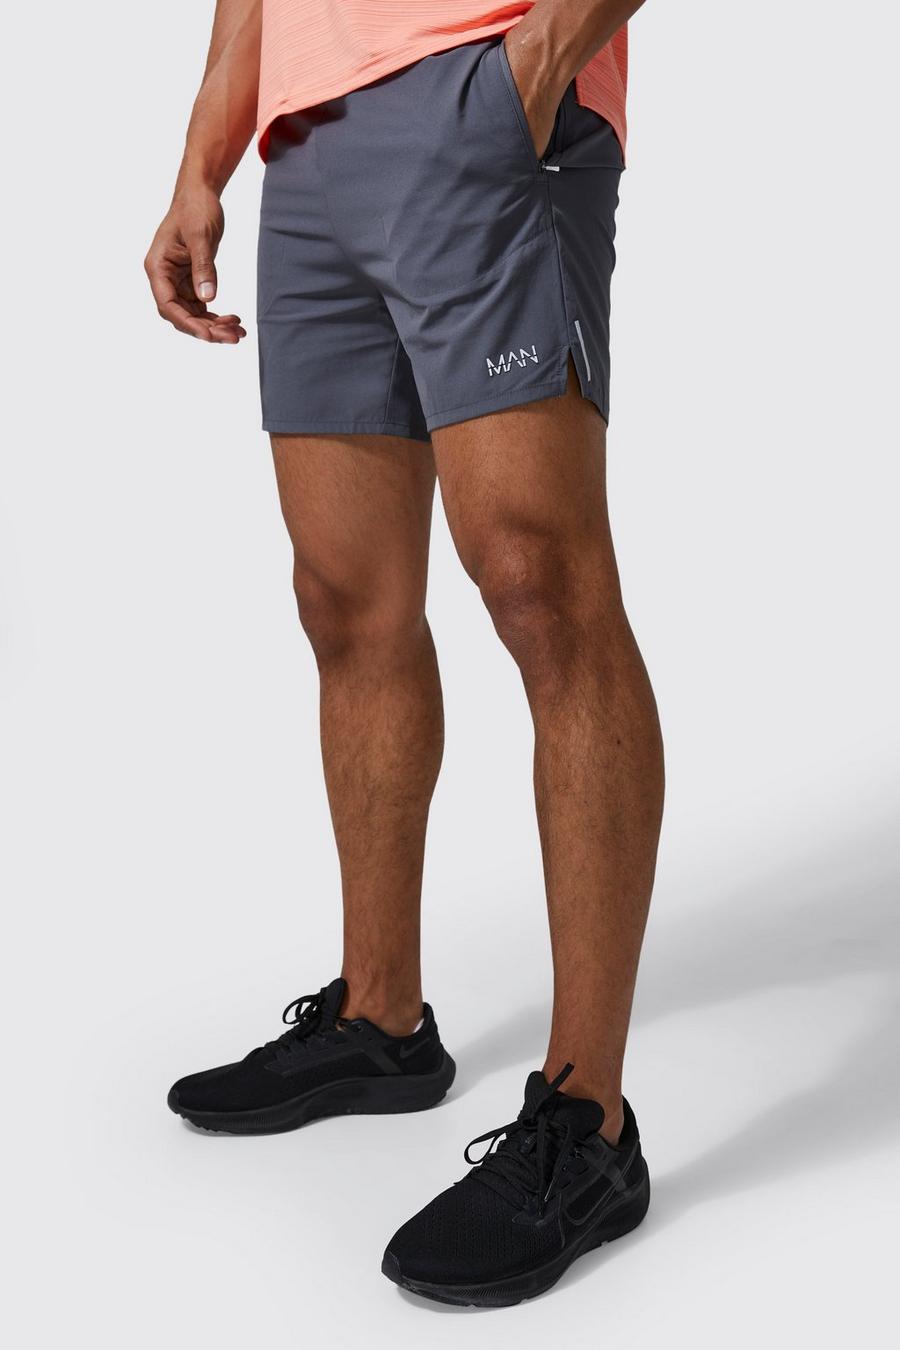 Man Active Lightweight Performance Shorts, Charcoal image number 1